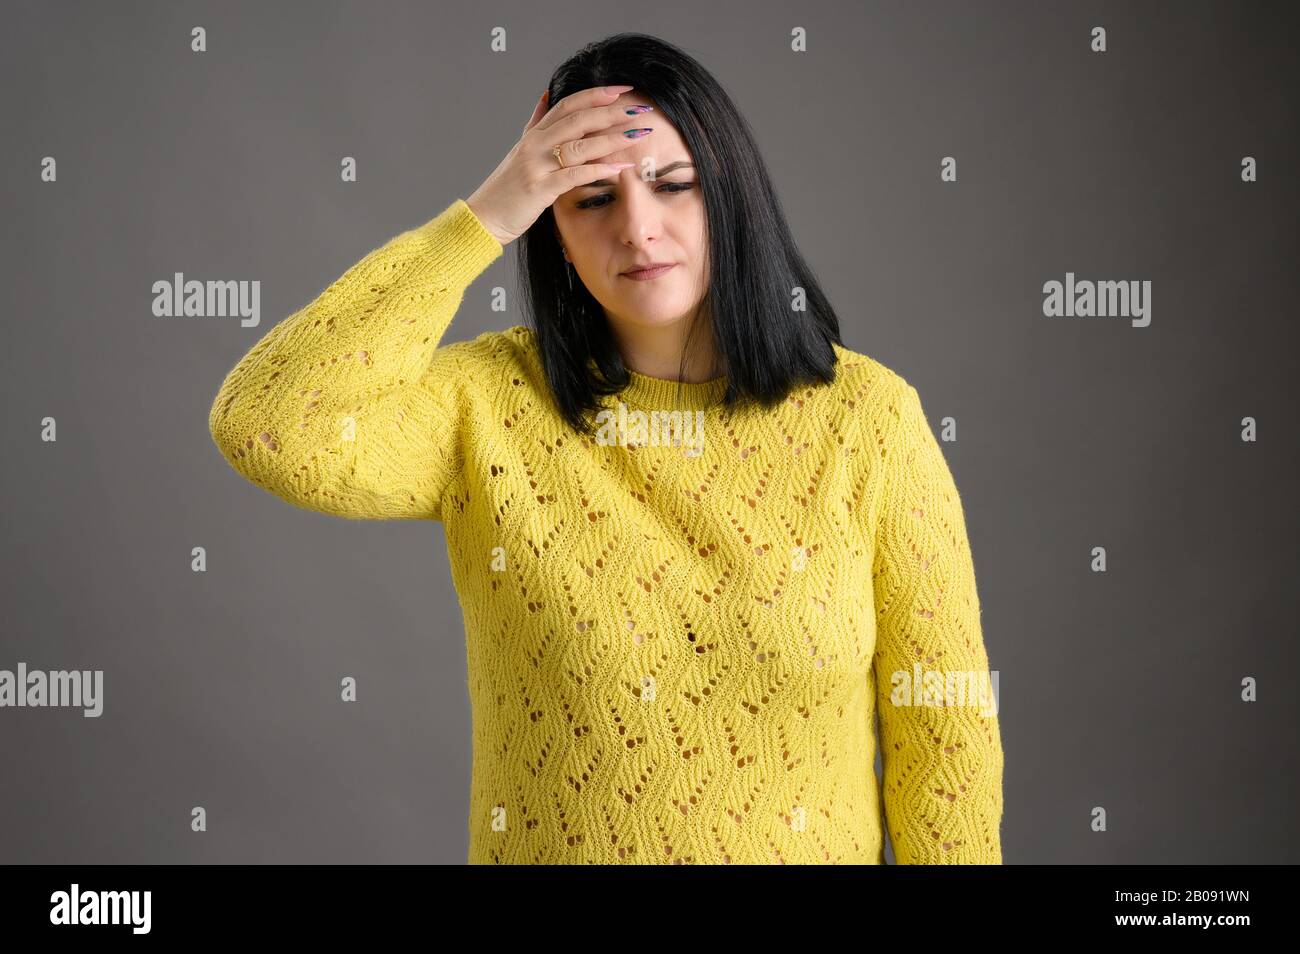 Young woman with black hair dressed casually in a yellow sweater has headaches posing an isolated grey background Stock Photo